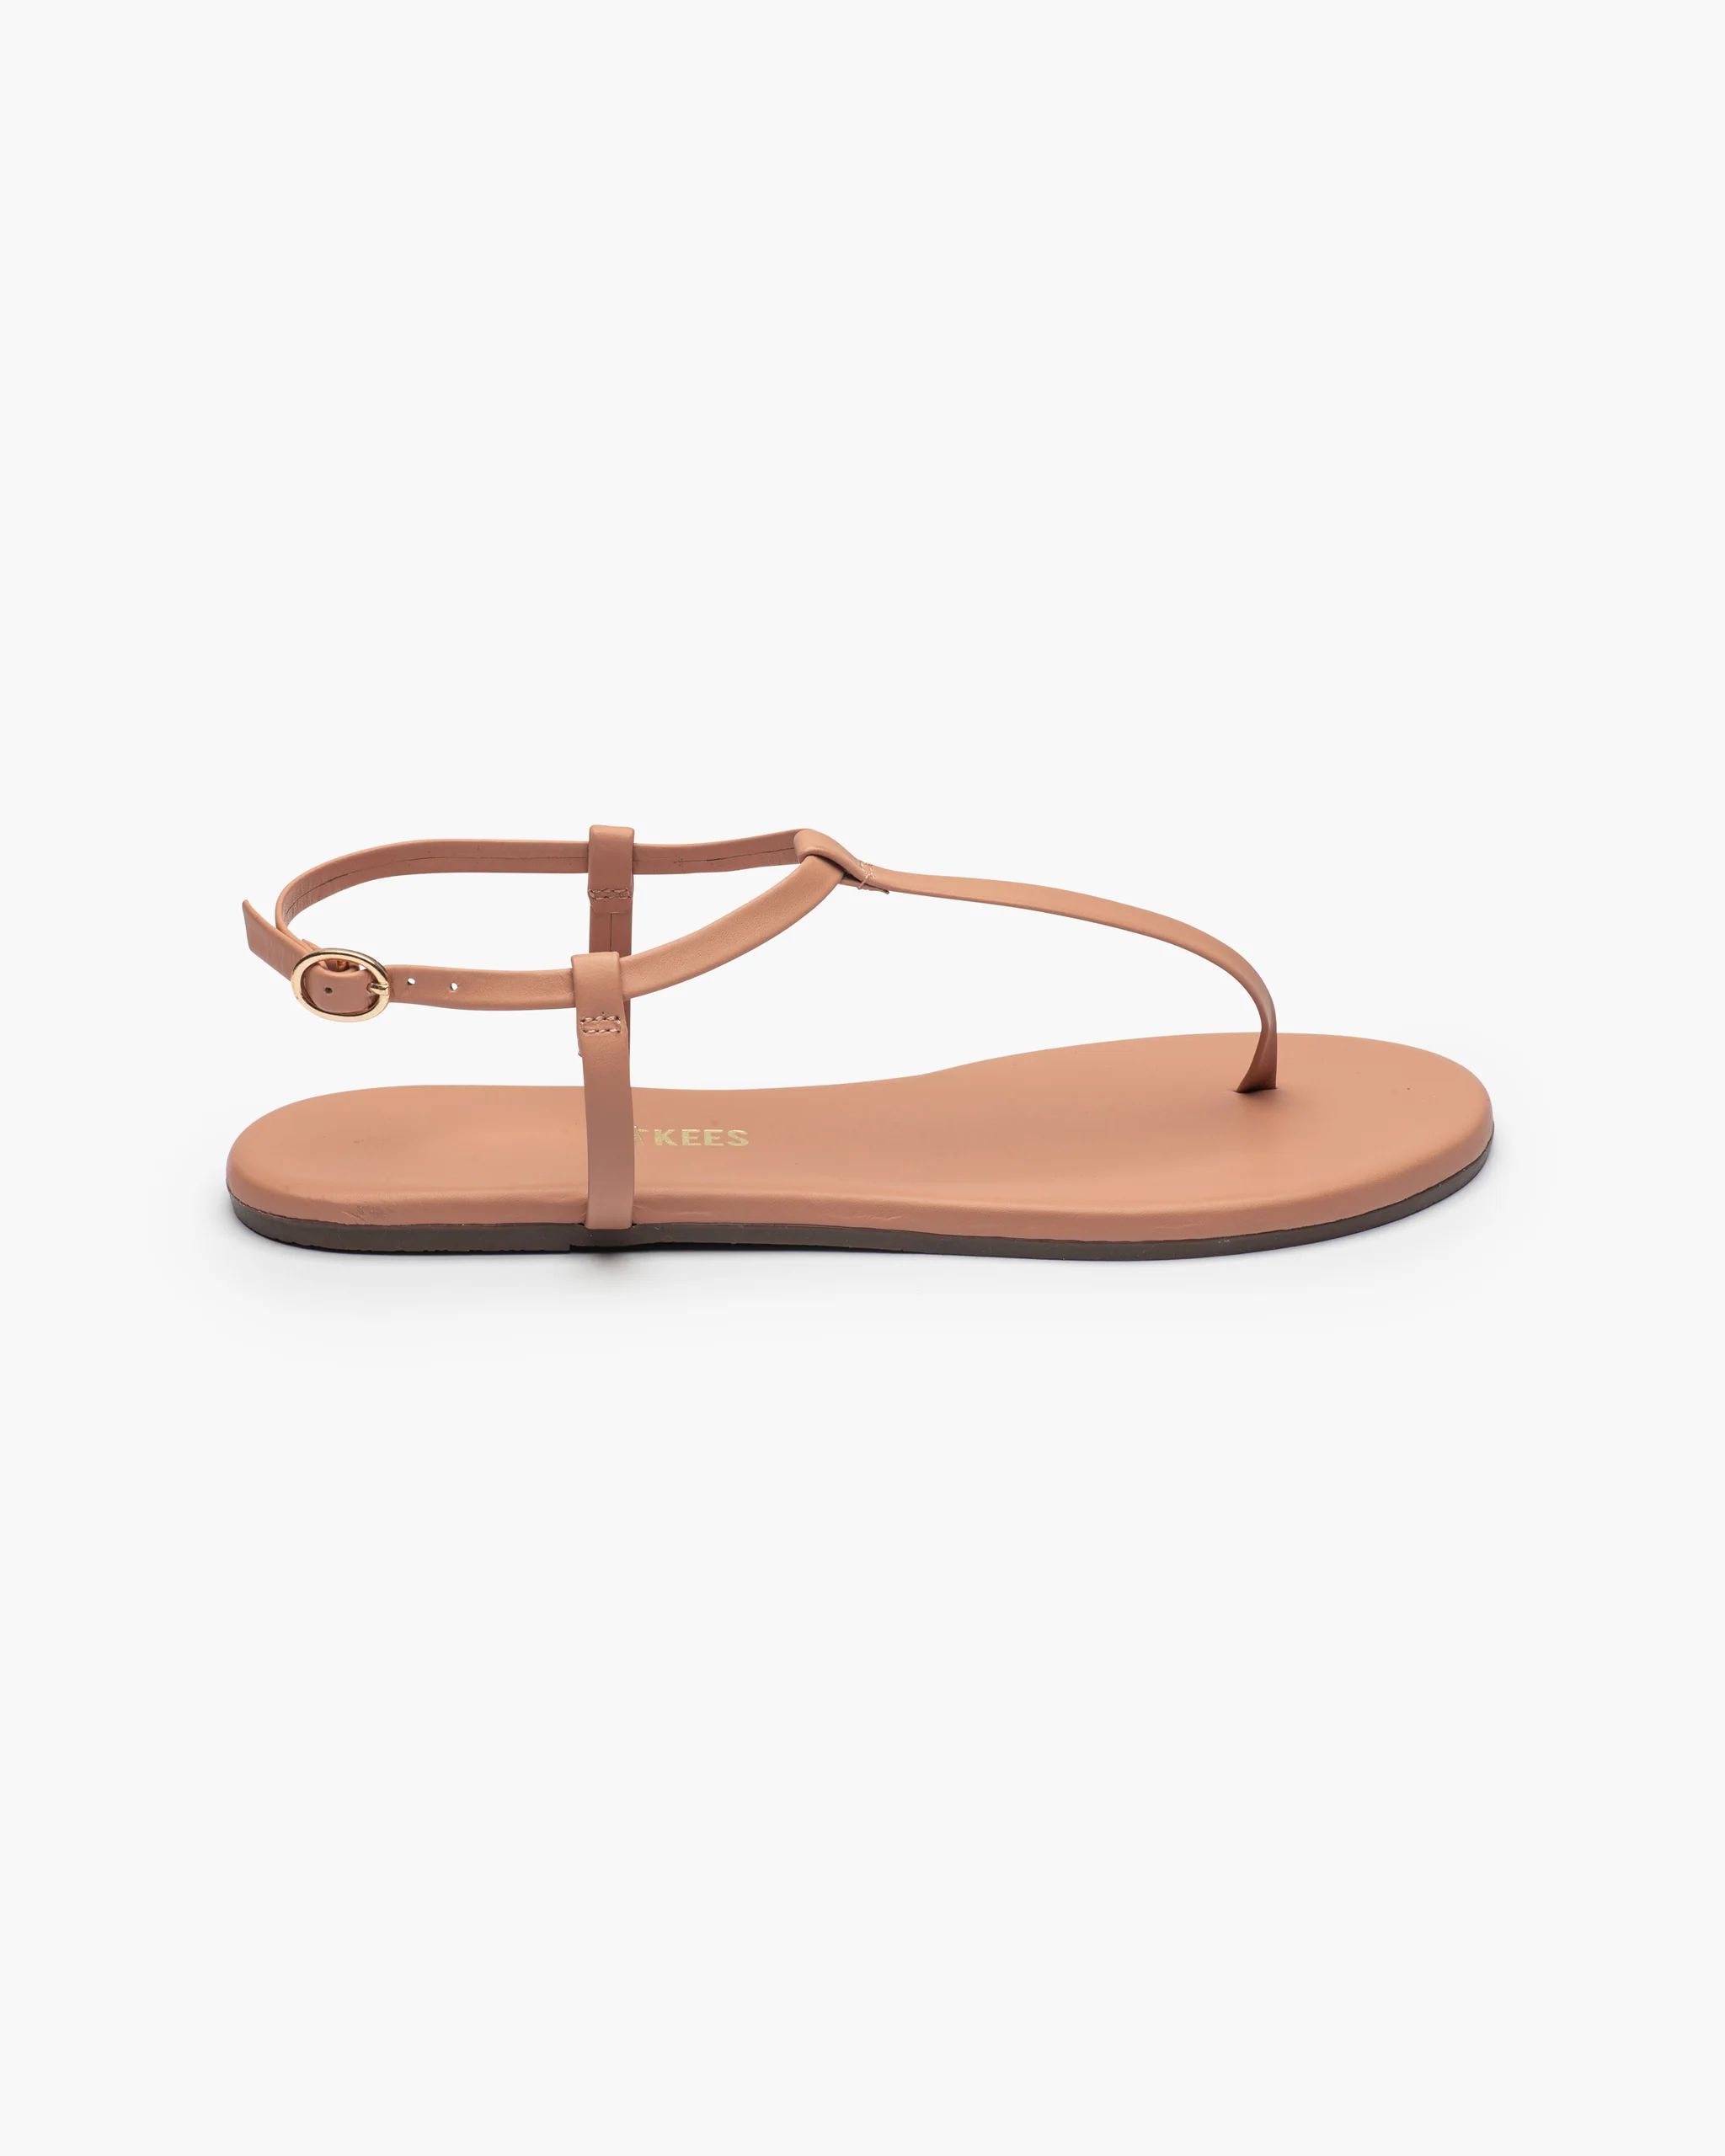 Mariana in Pout | Sandals | Women's Footwear | TKEES